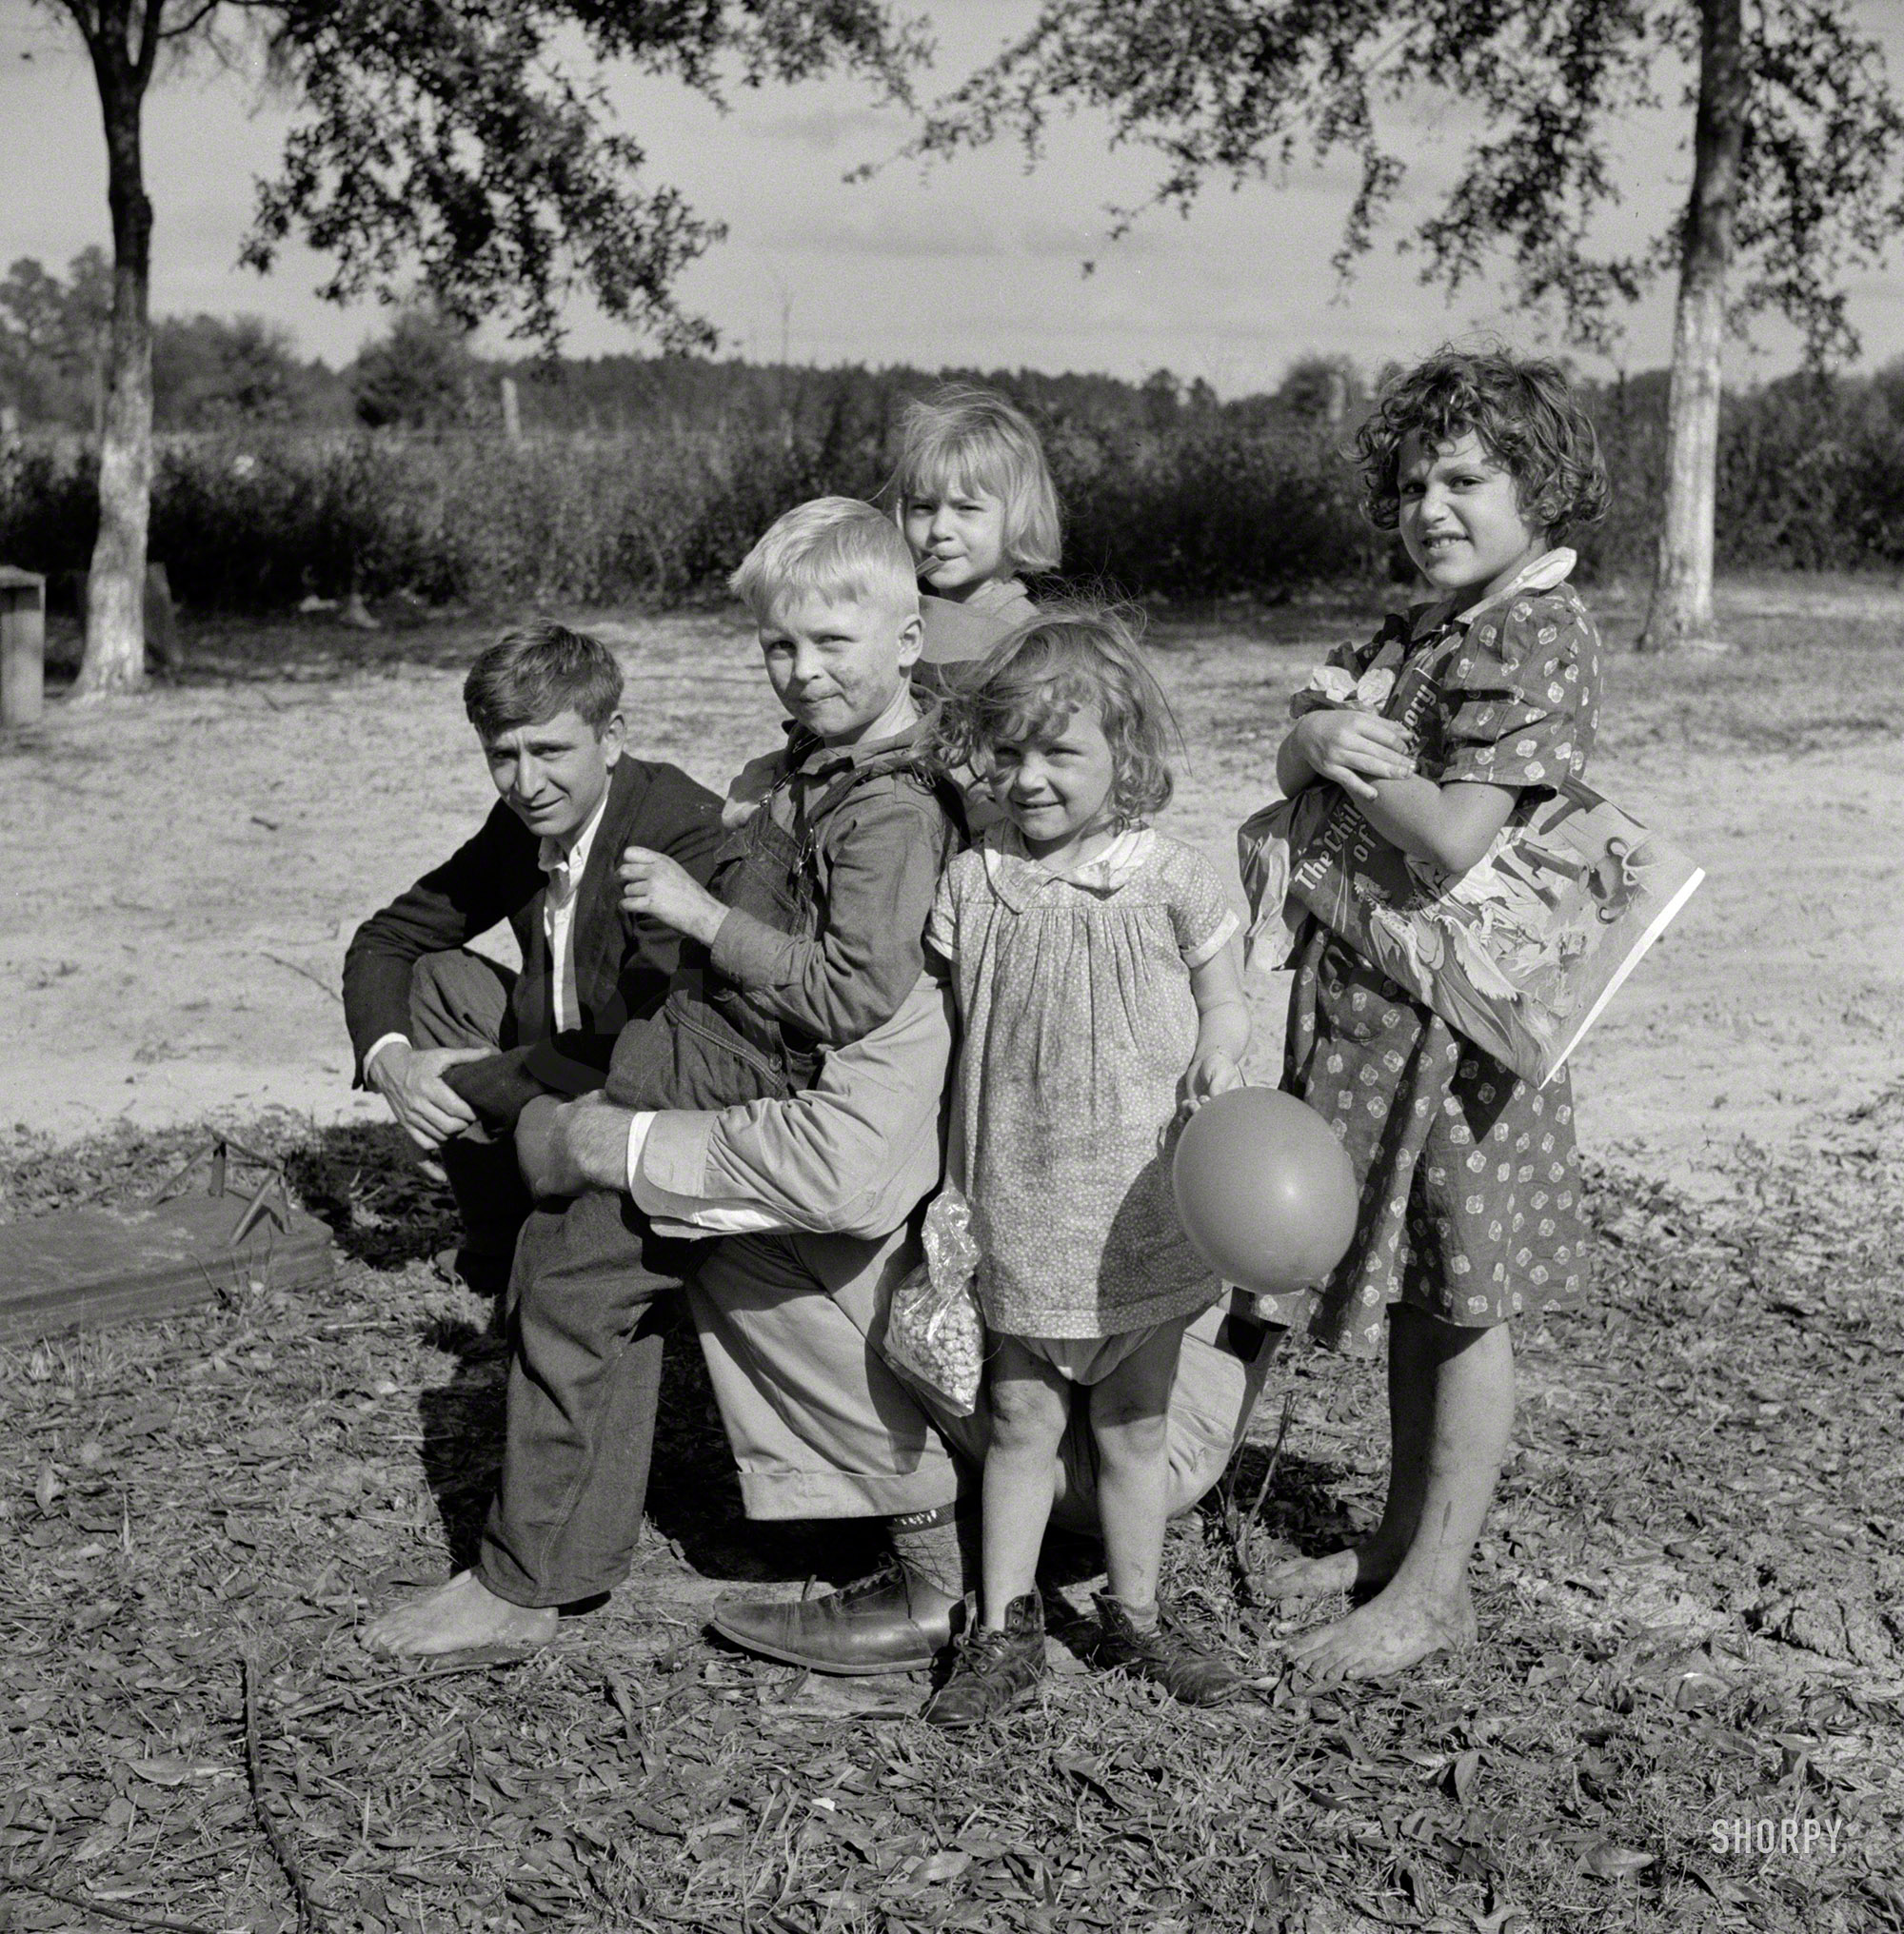 January 1941. "Starke, Florida. Family of construction worker who had been employed on Camp Blanding job." Medium format negative by Marion Post Wolcott for the Resettlement Administration. View full size.